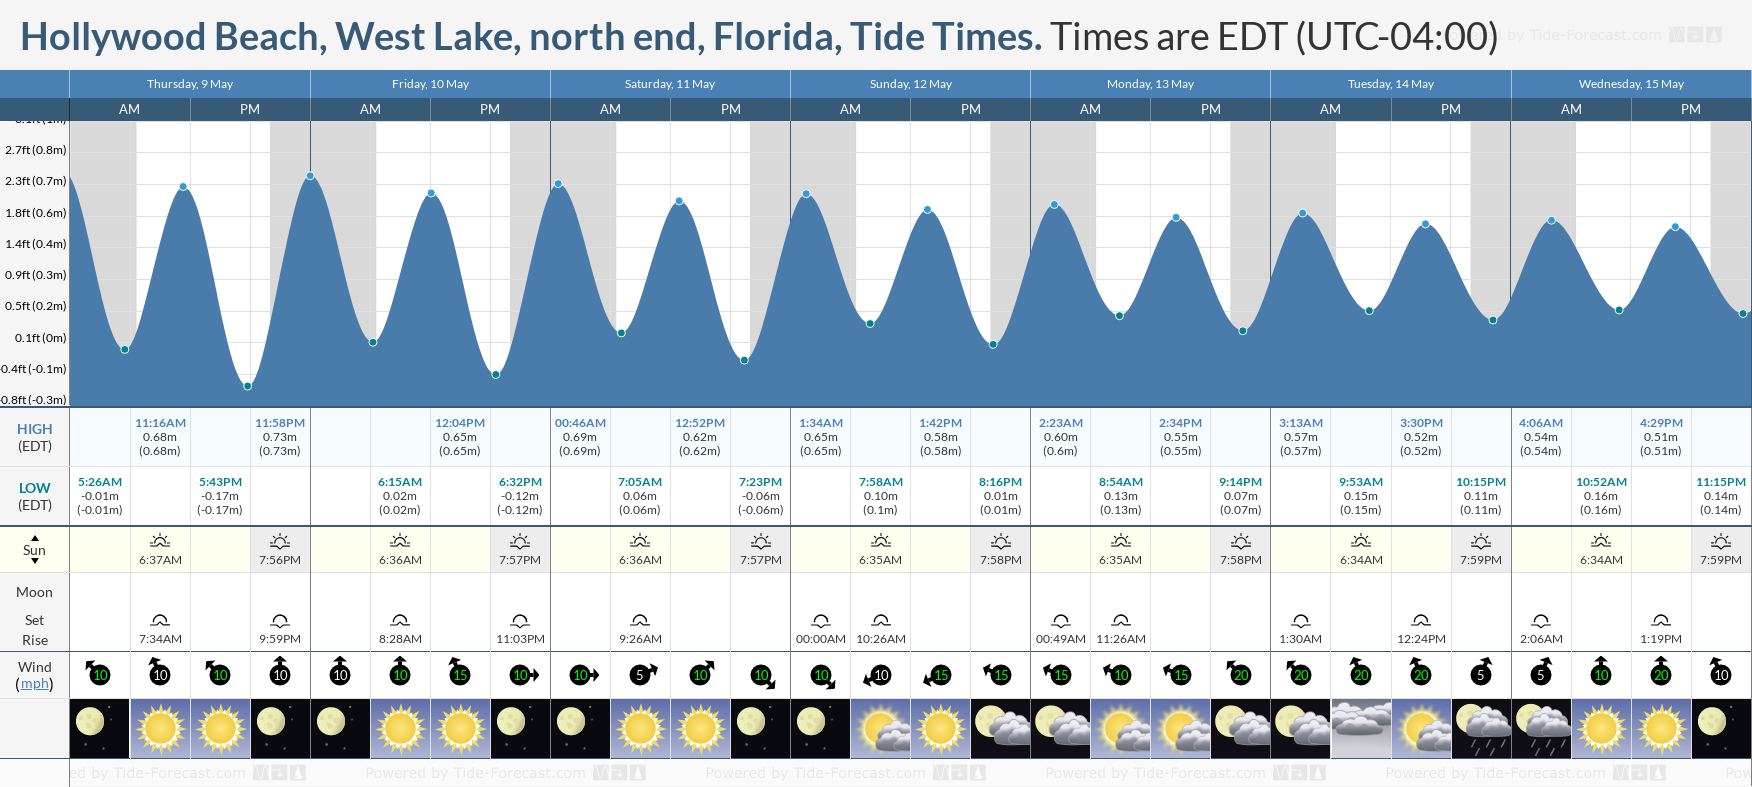 Hollywood Beach, West Lake, north end, Florida Tide Chart including high and low tide times for the next 7 days